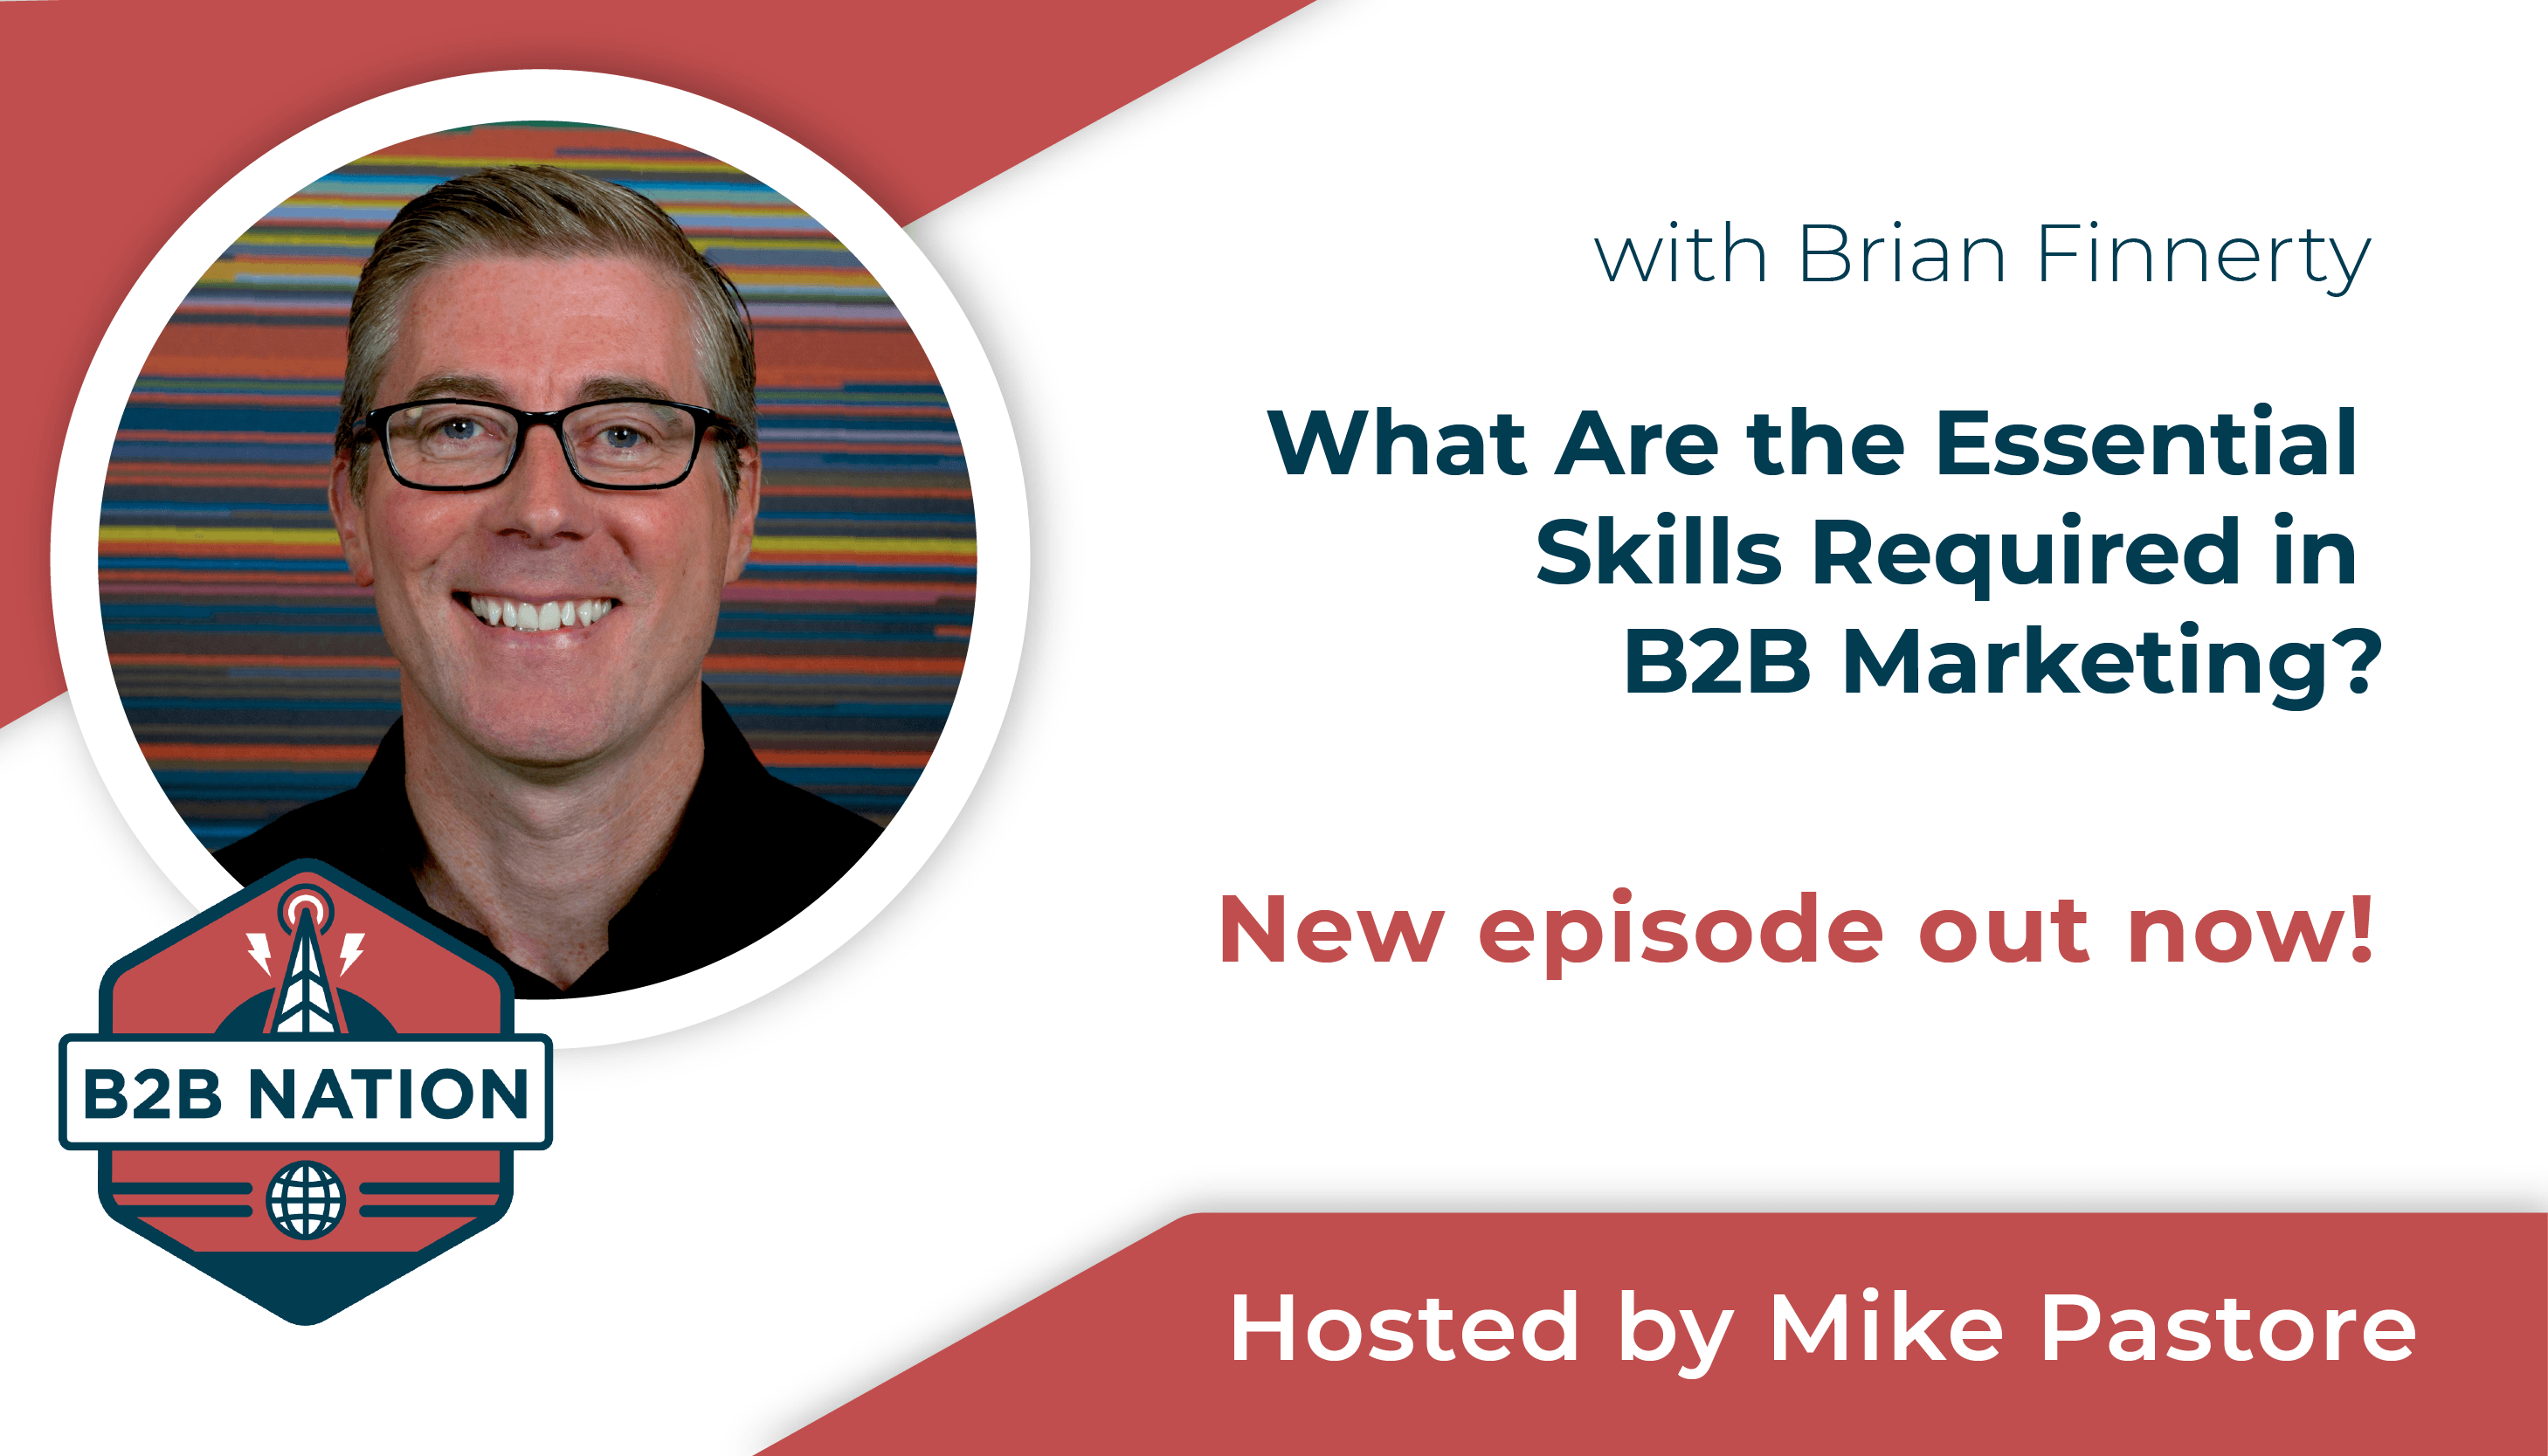 Brian Finnerty discusses the essential skills for B2B marketers on B2B Nation.